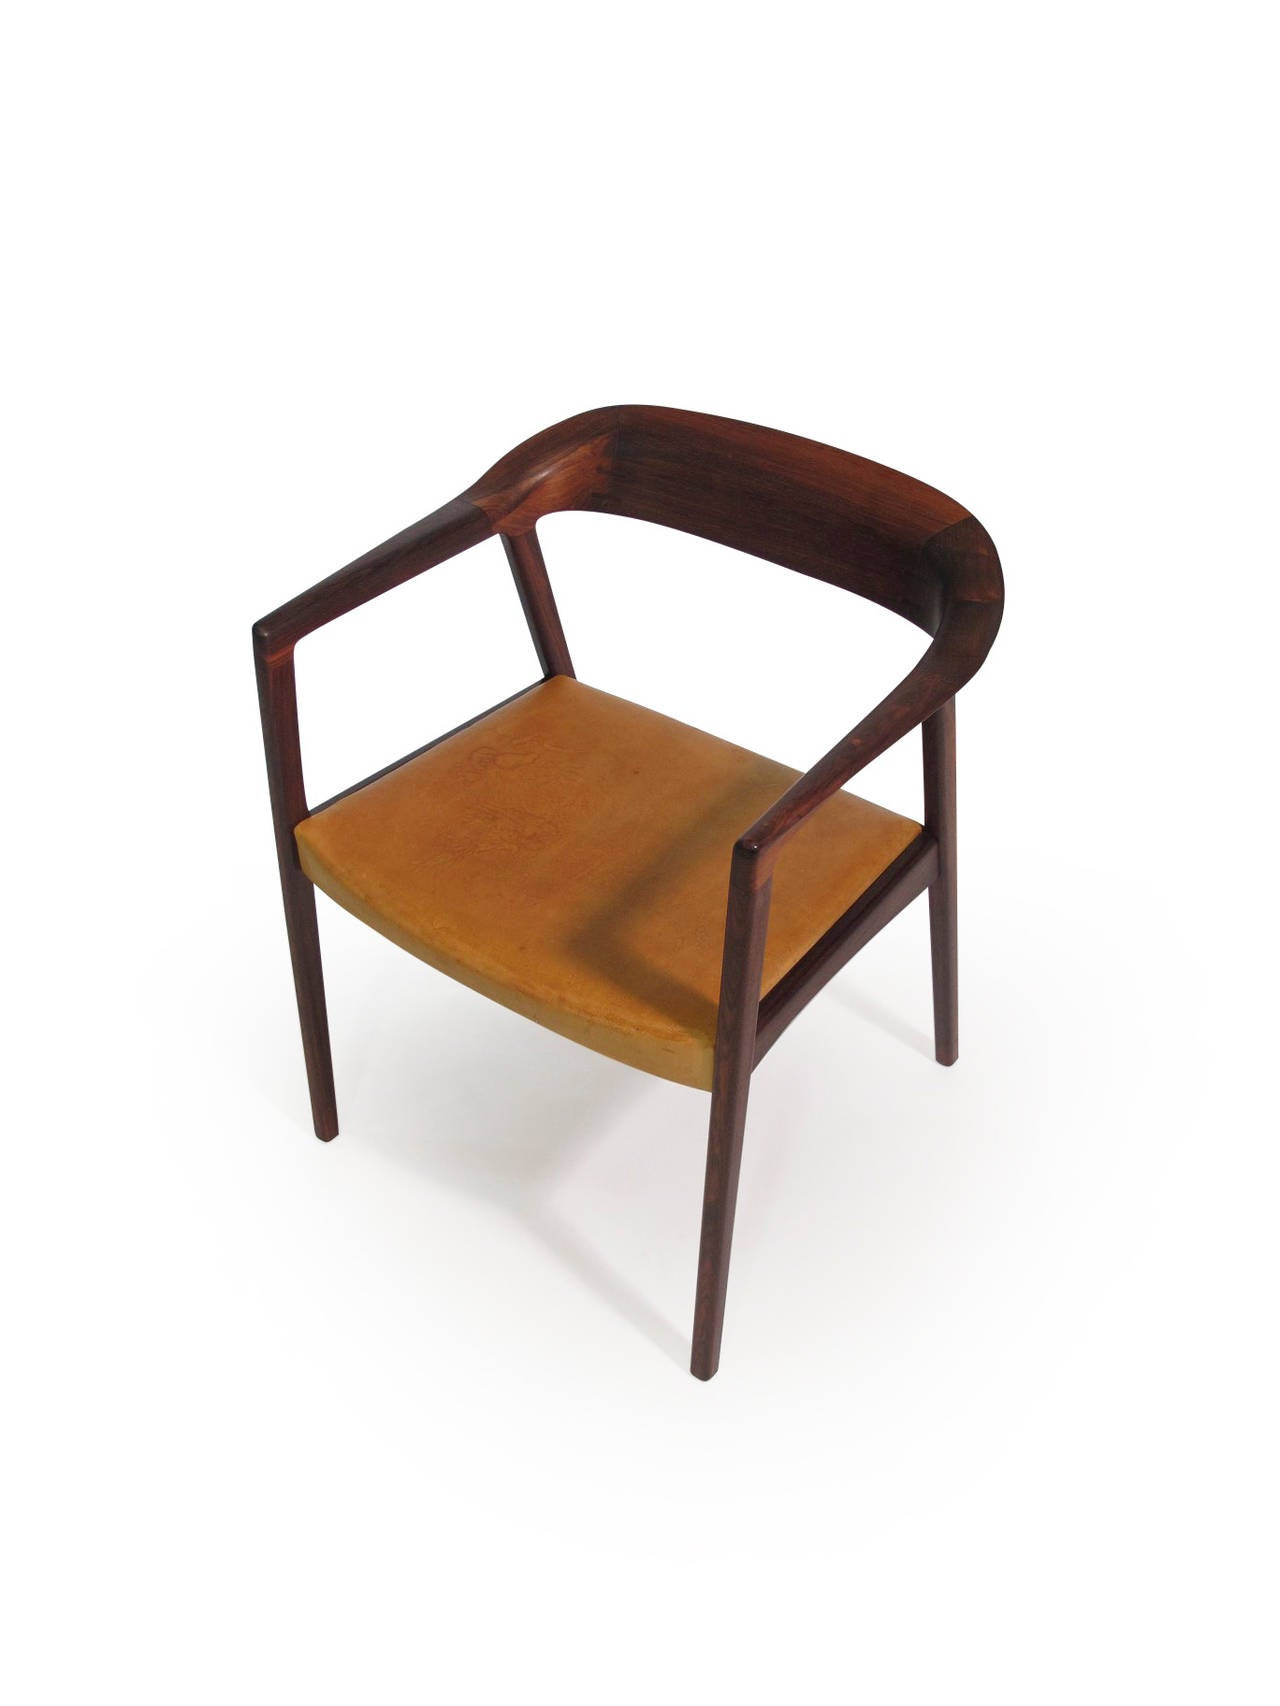 Elegant mid-century arm chair handcrafted of solid Brazilian rosewood with exposed joinery in the back with original distressed leather seat.